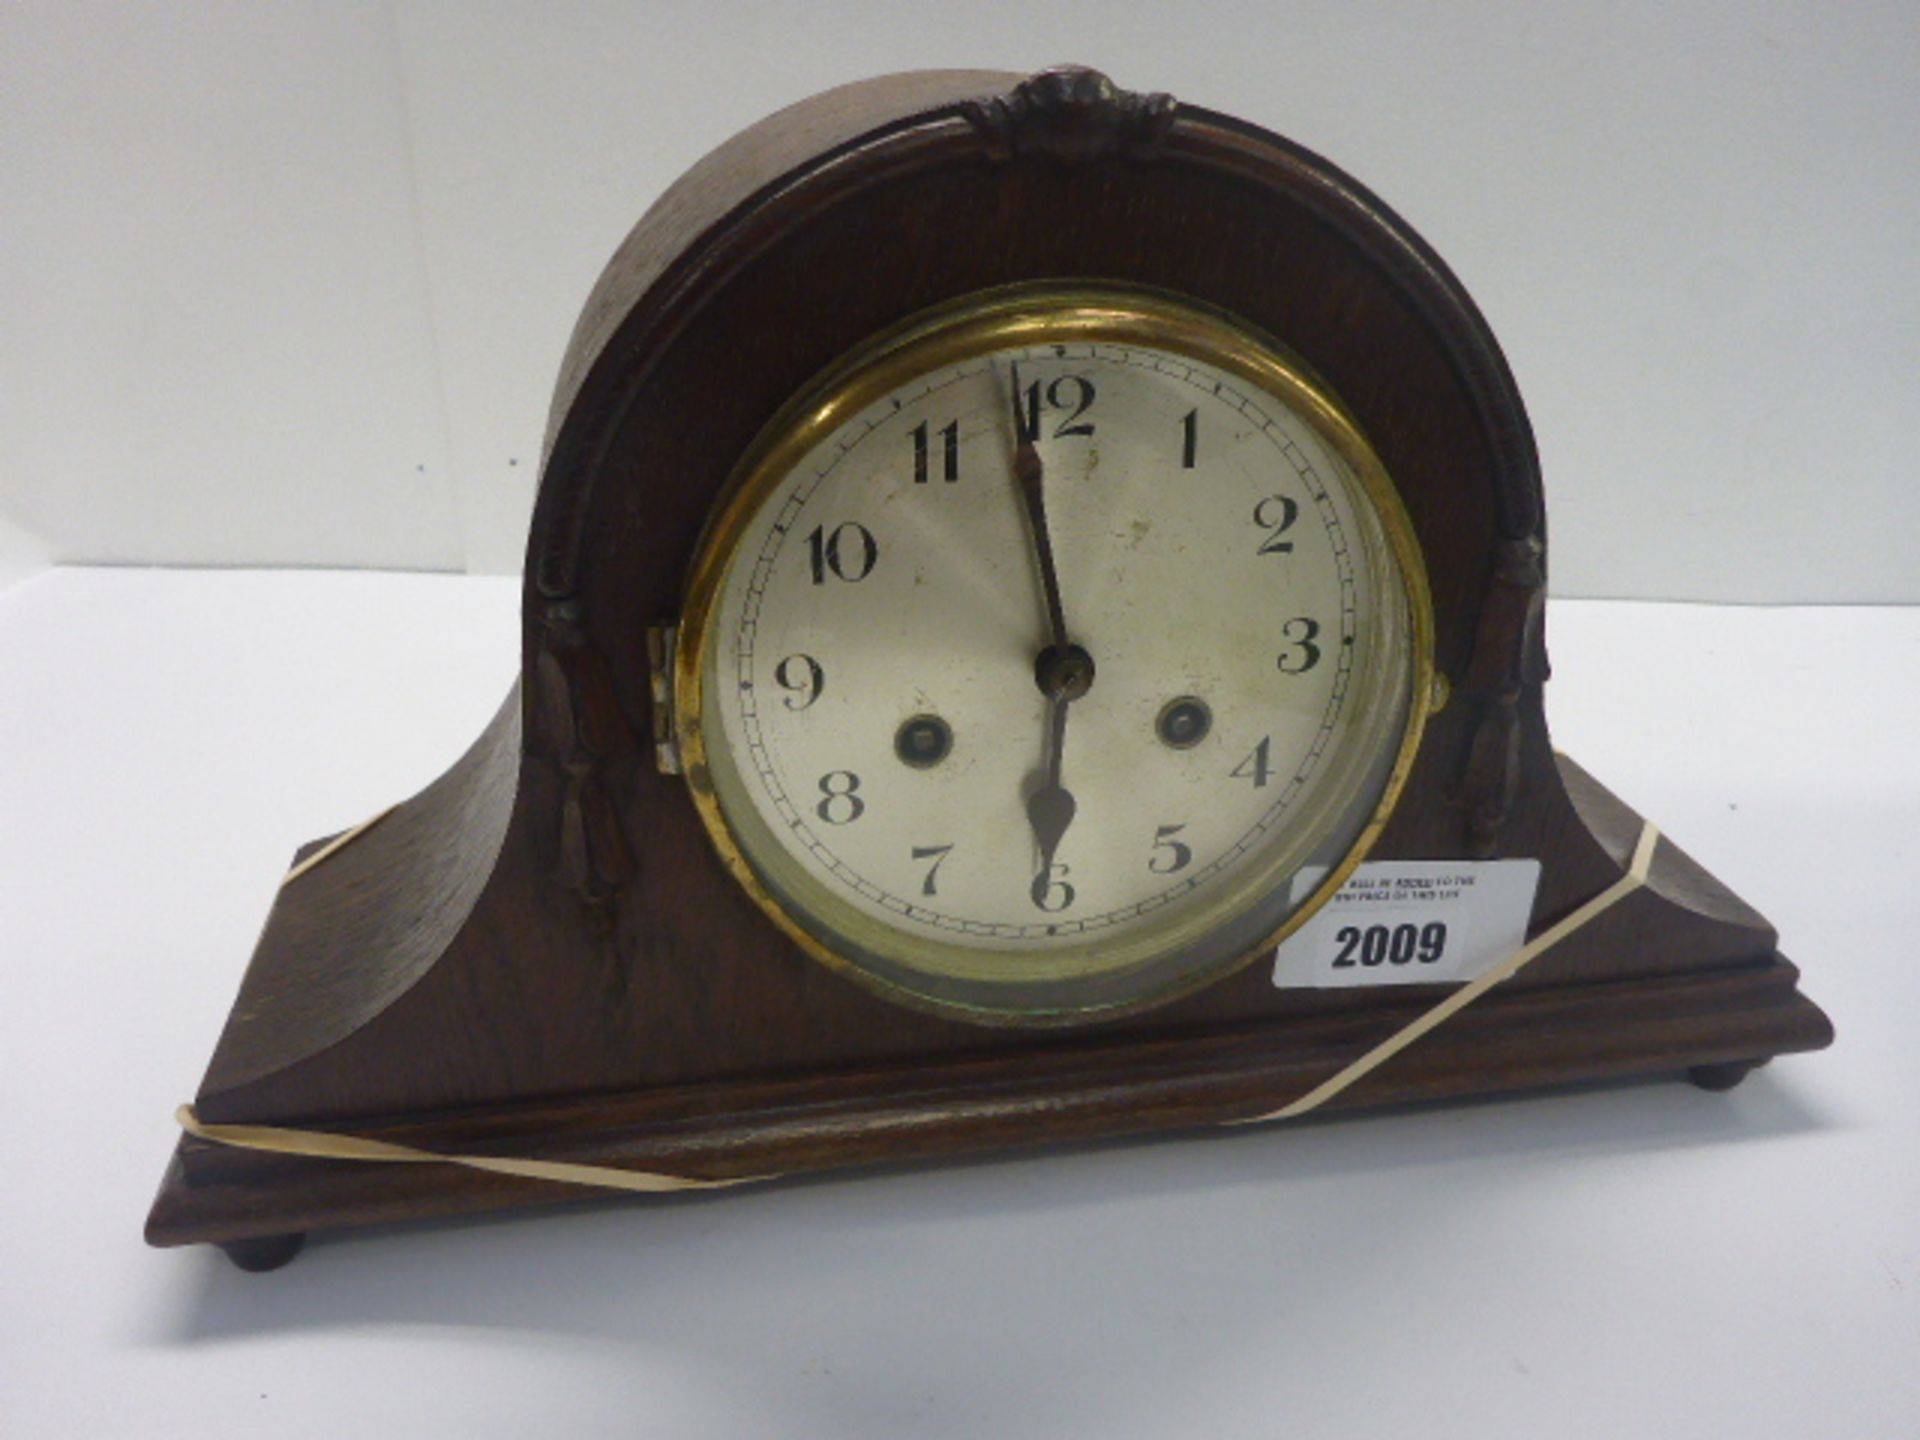 Wooden cased mantle clock with pendulum, A/F Broken Base.